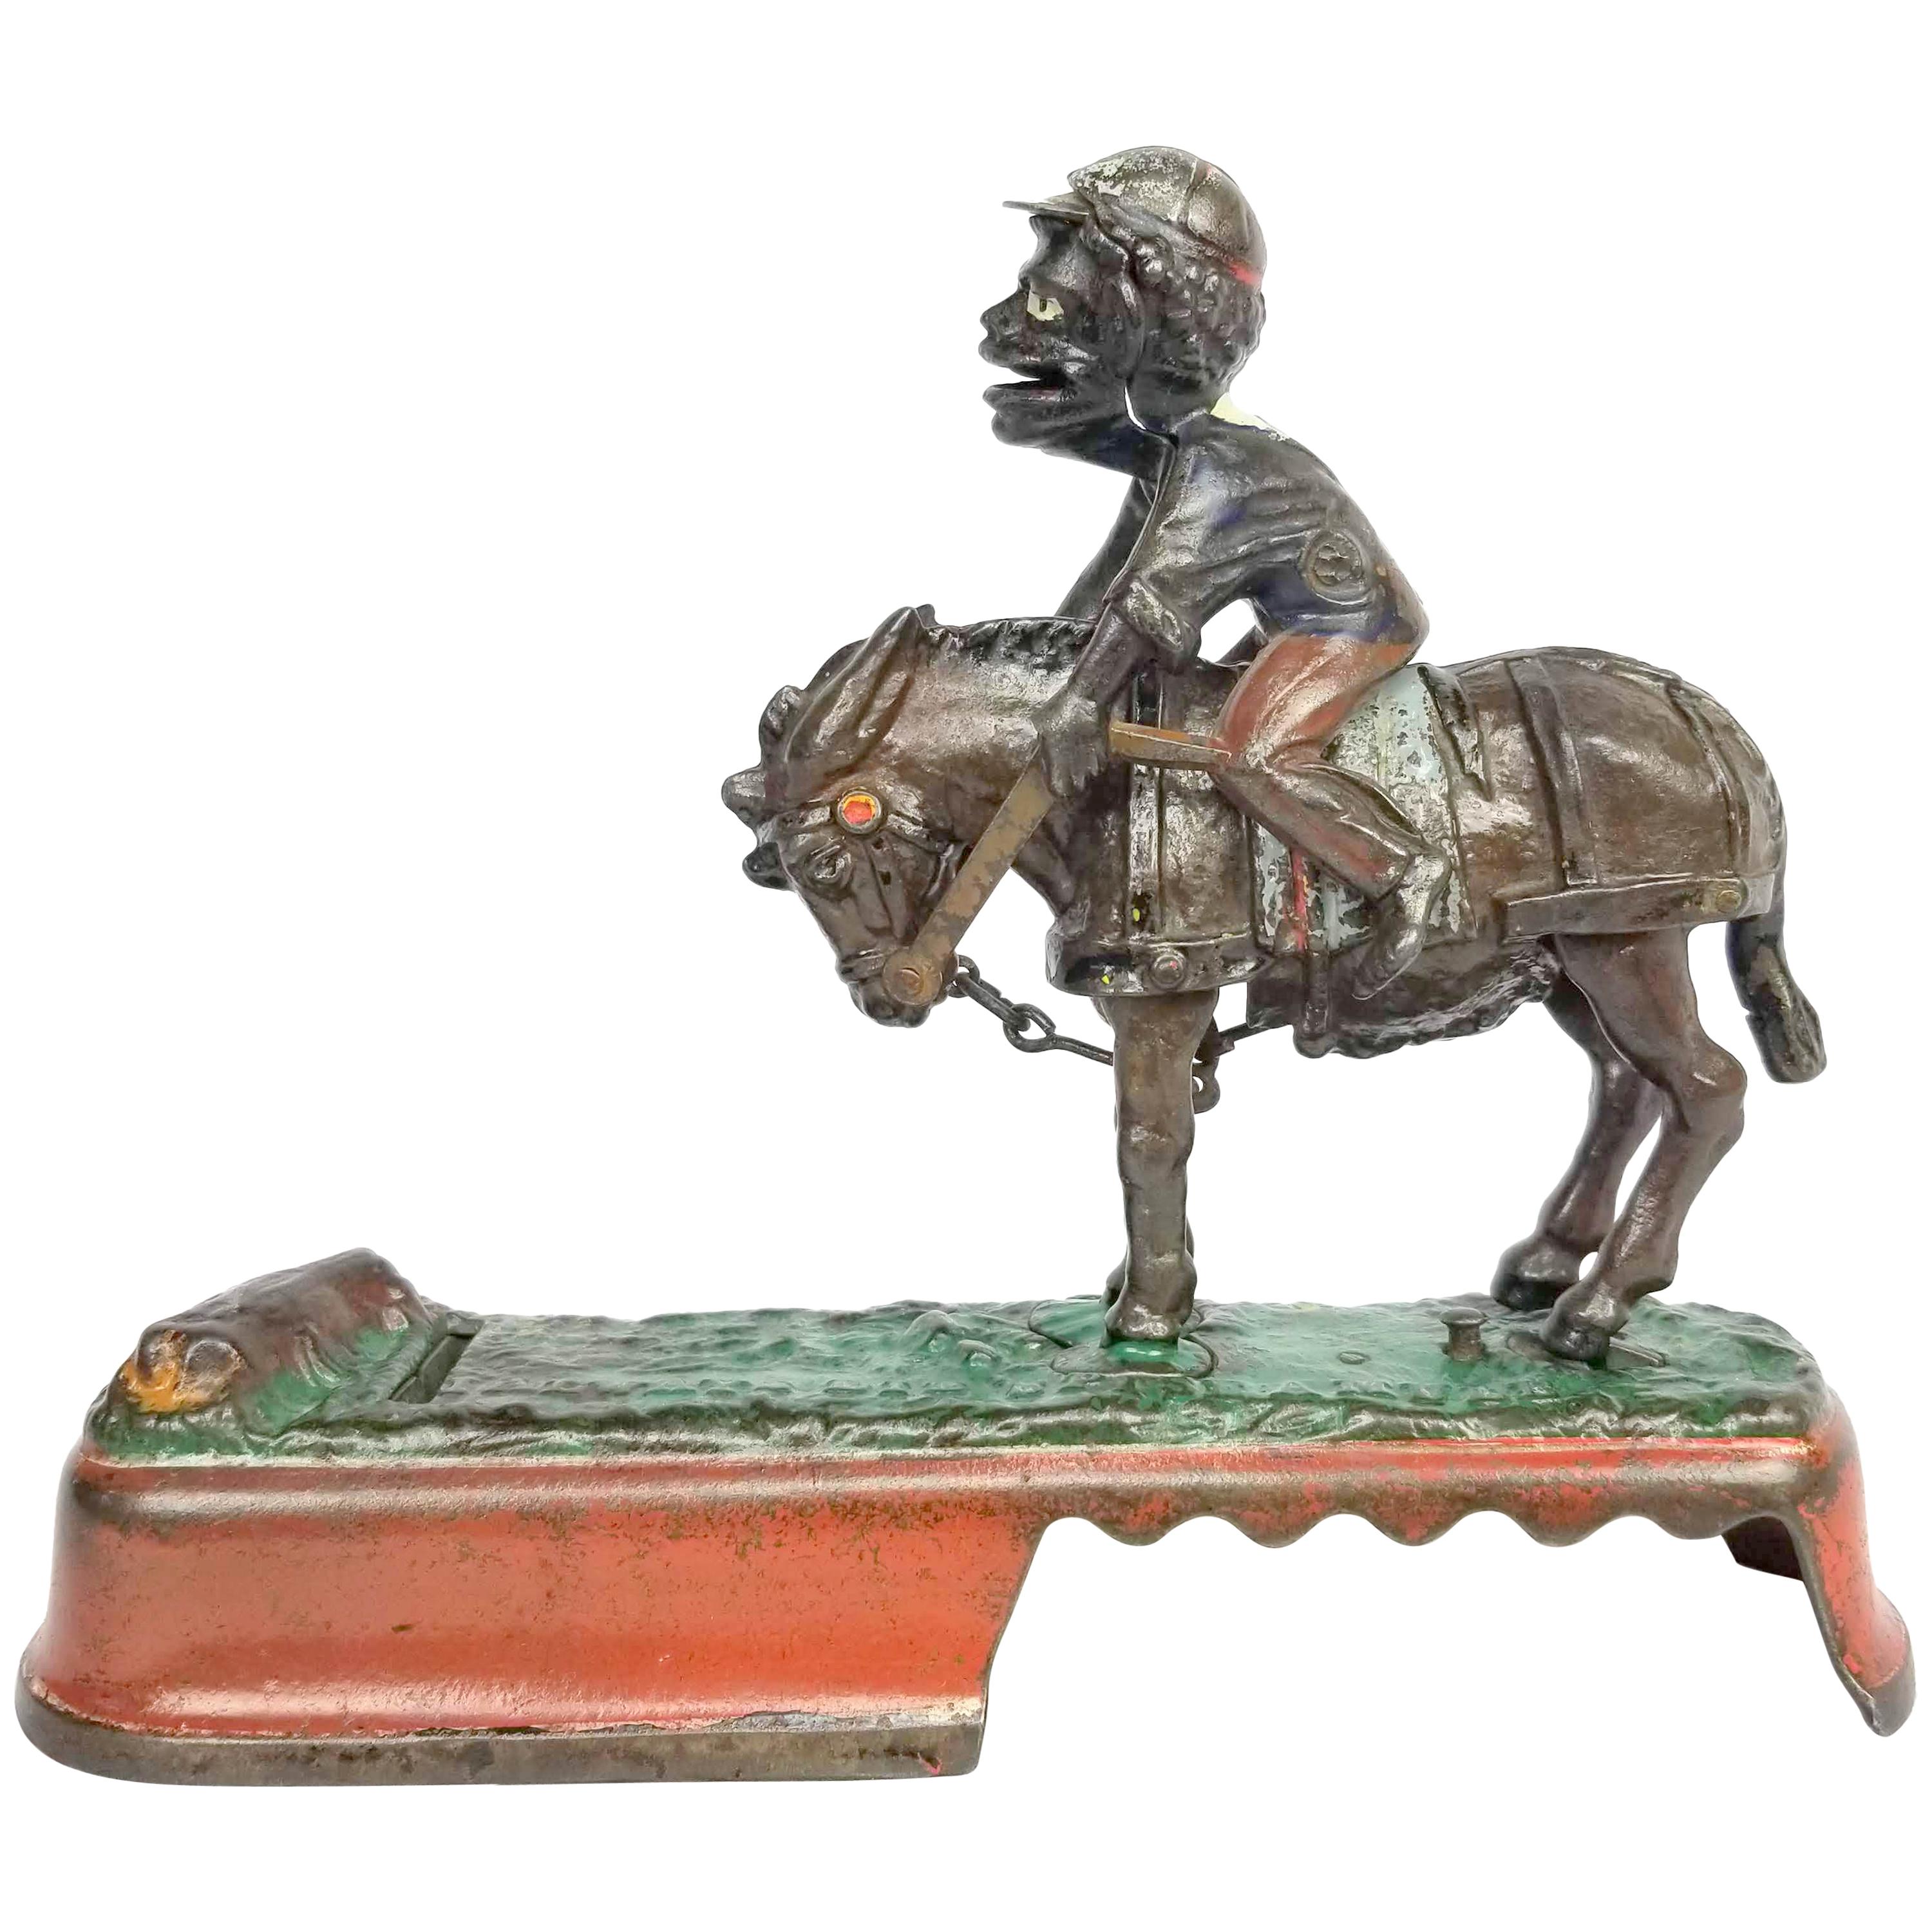 Mechanical Bank, "I Always Did 'Spise a Mule" Jockey over Version, circa 1879 For Sale